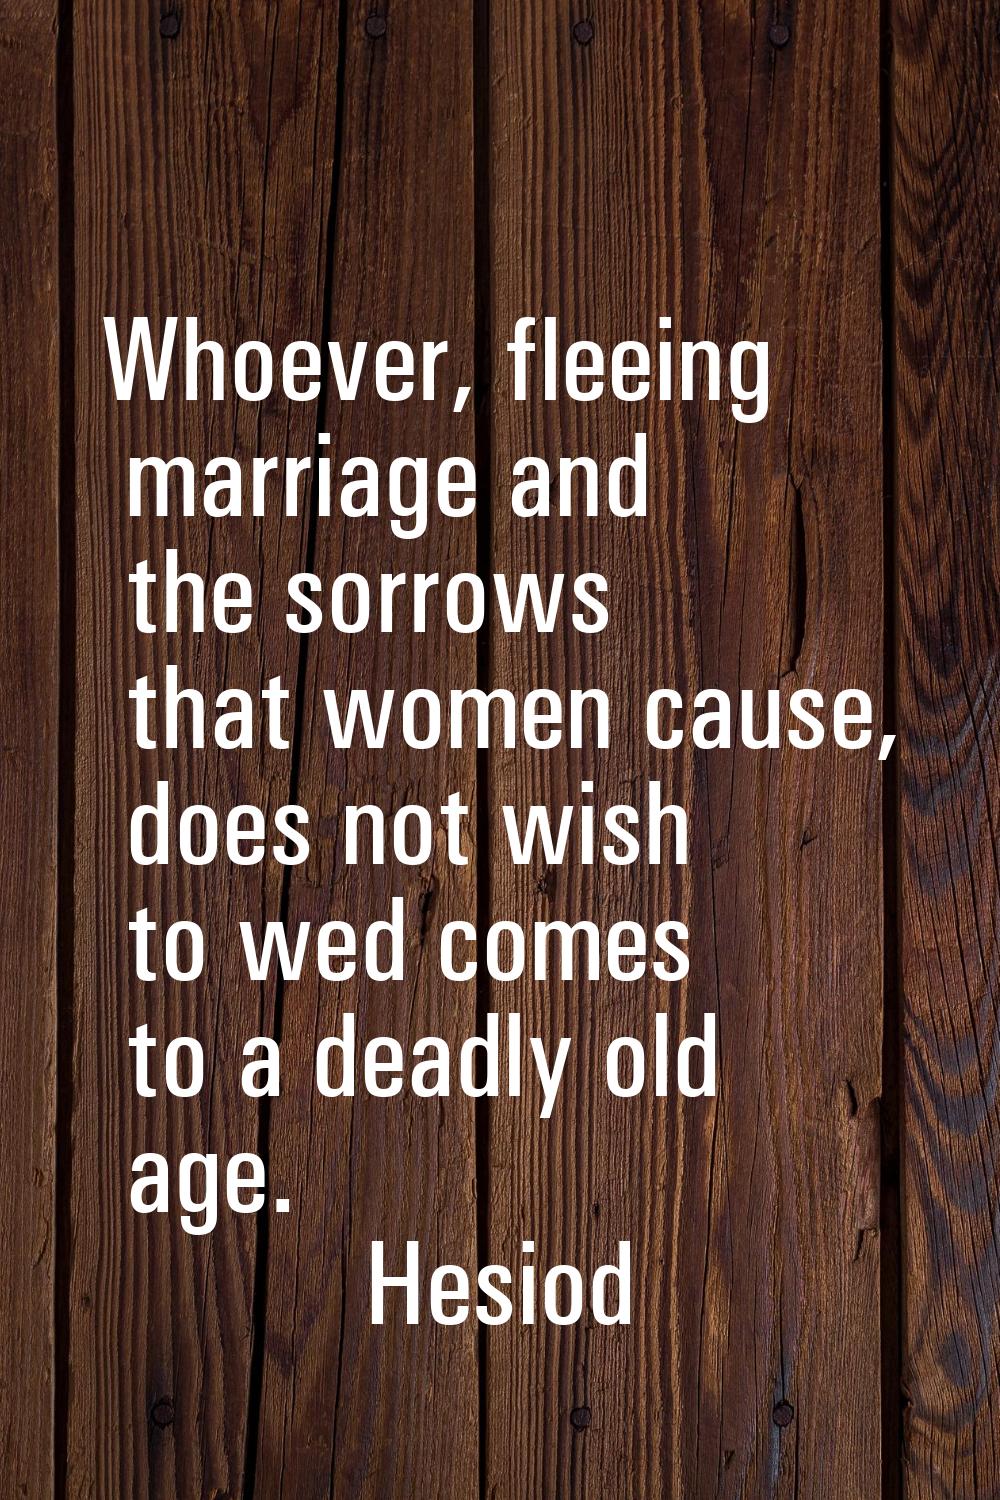 Whoever, fleeing marriage and the sorrows that women cause, does not wish to wed comes to a deadly 